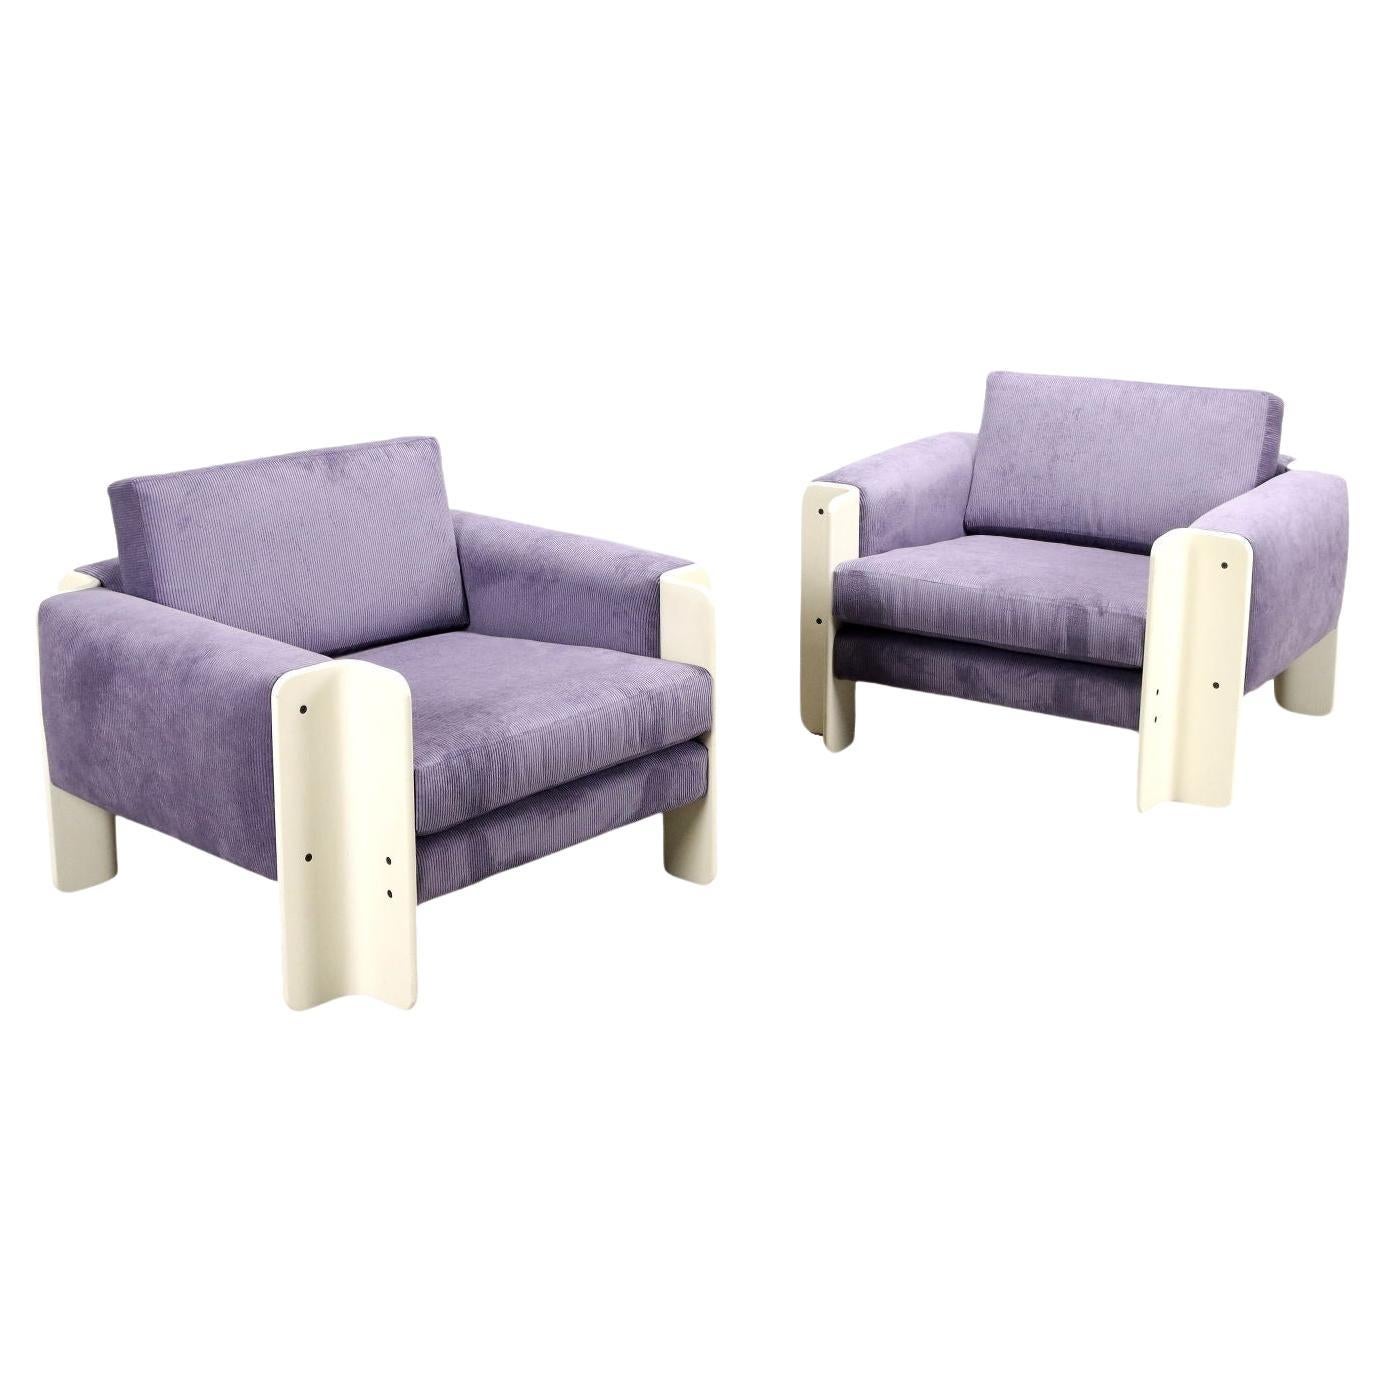 Pair of 1970s armchairs in lilac velvet and white lacquered wood